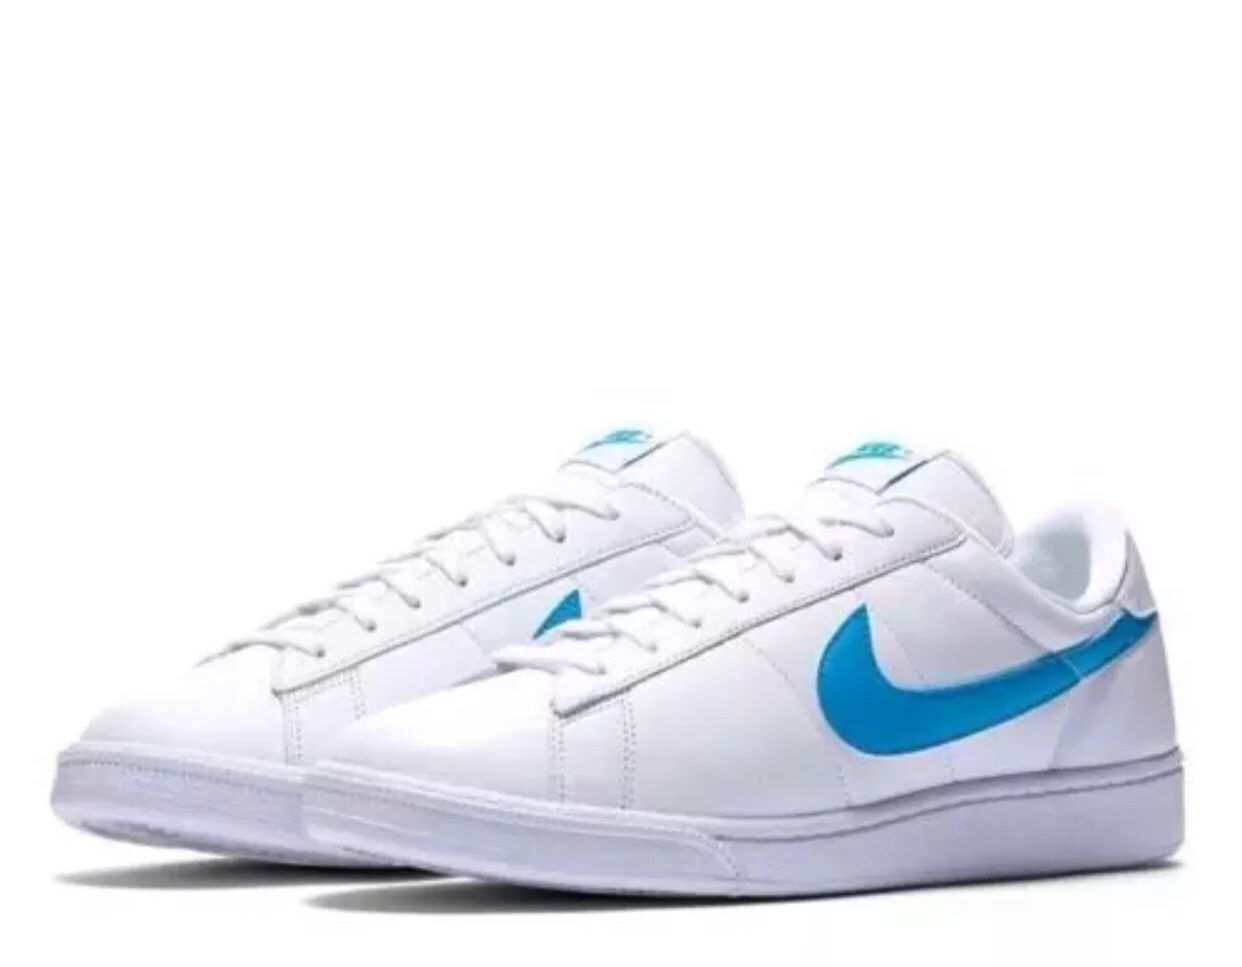 Tennis Classic White/Orion Blue Leather Athletic 312495-144 Men's 11 for Sale in Houston, TX - OfferUp